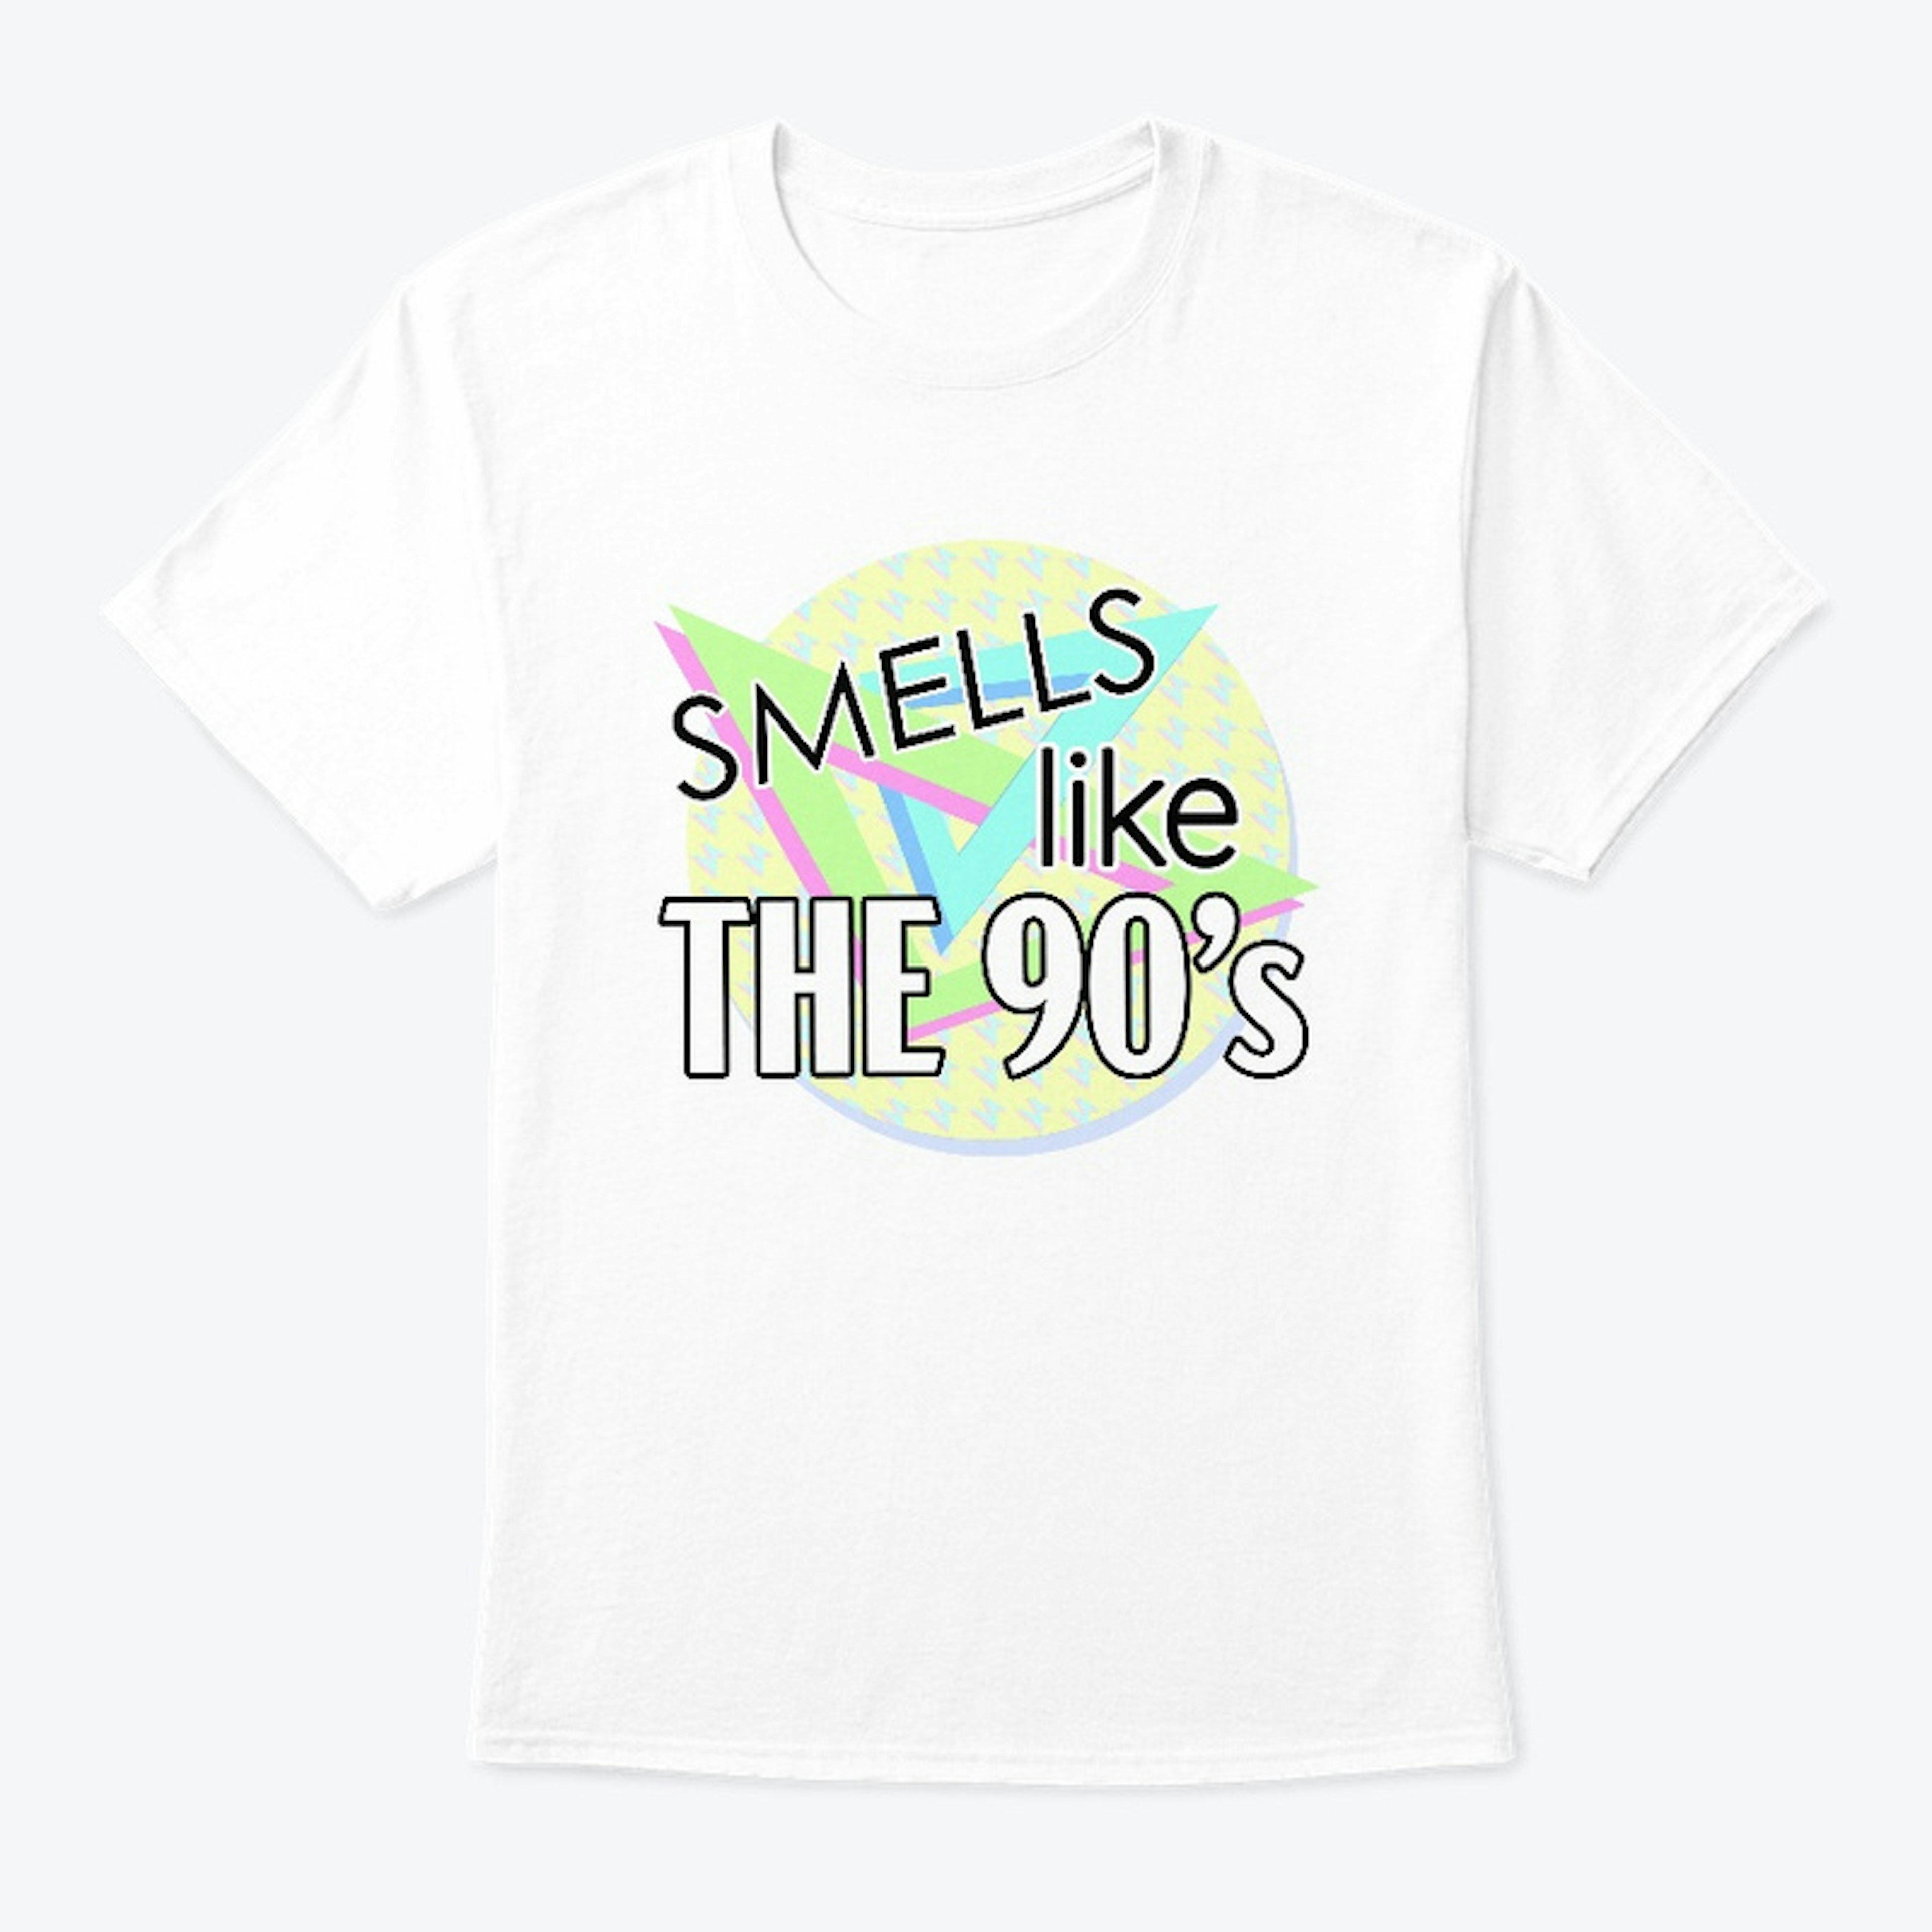 Smells like The 90's